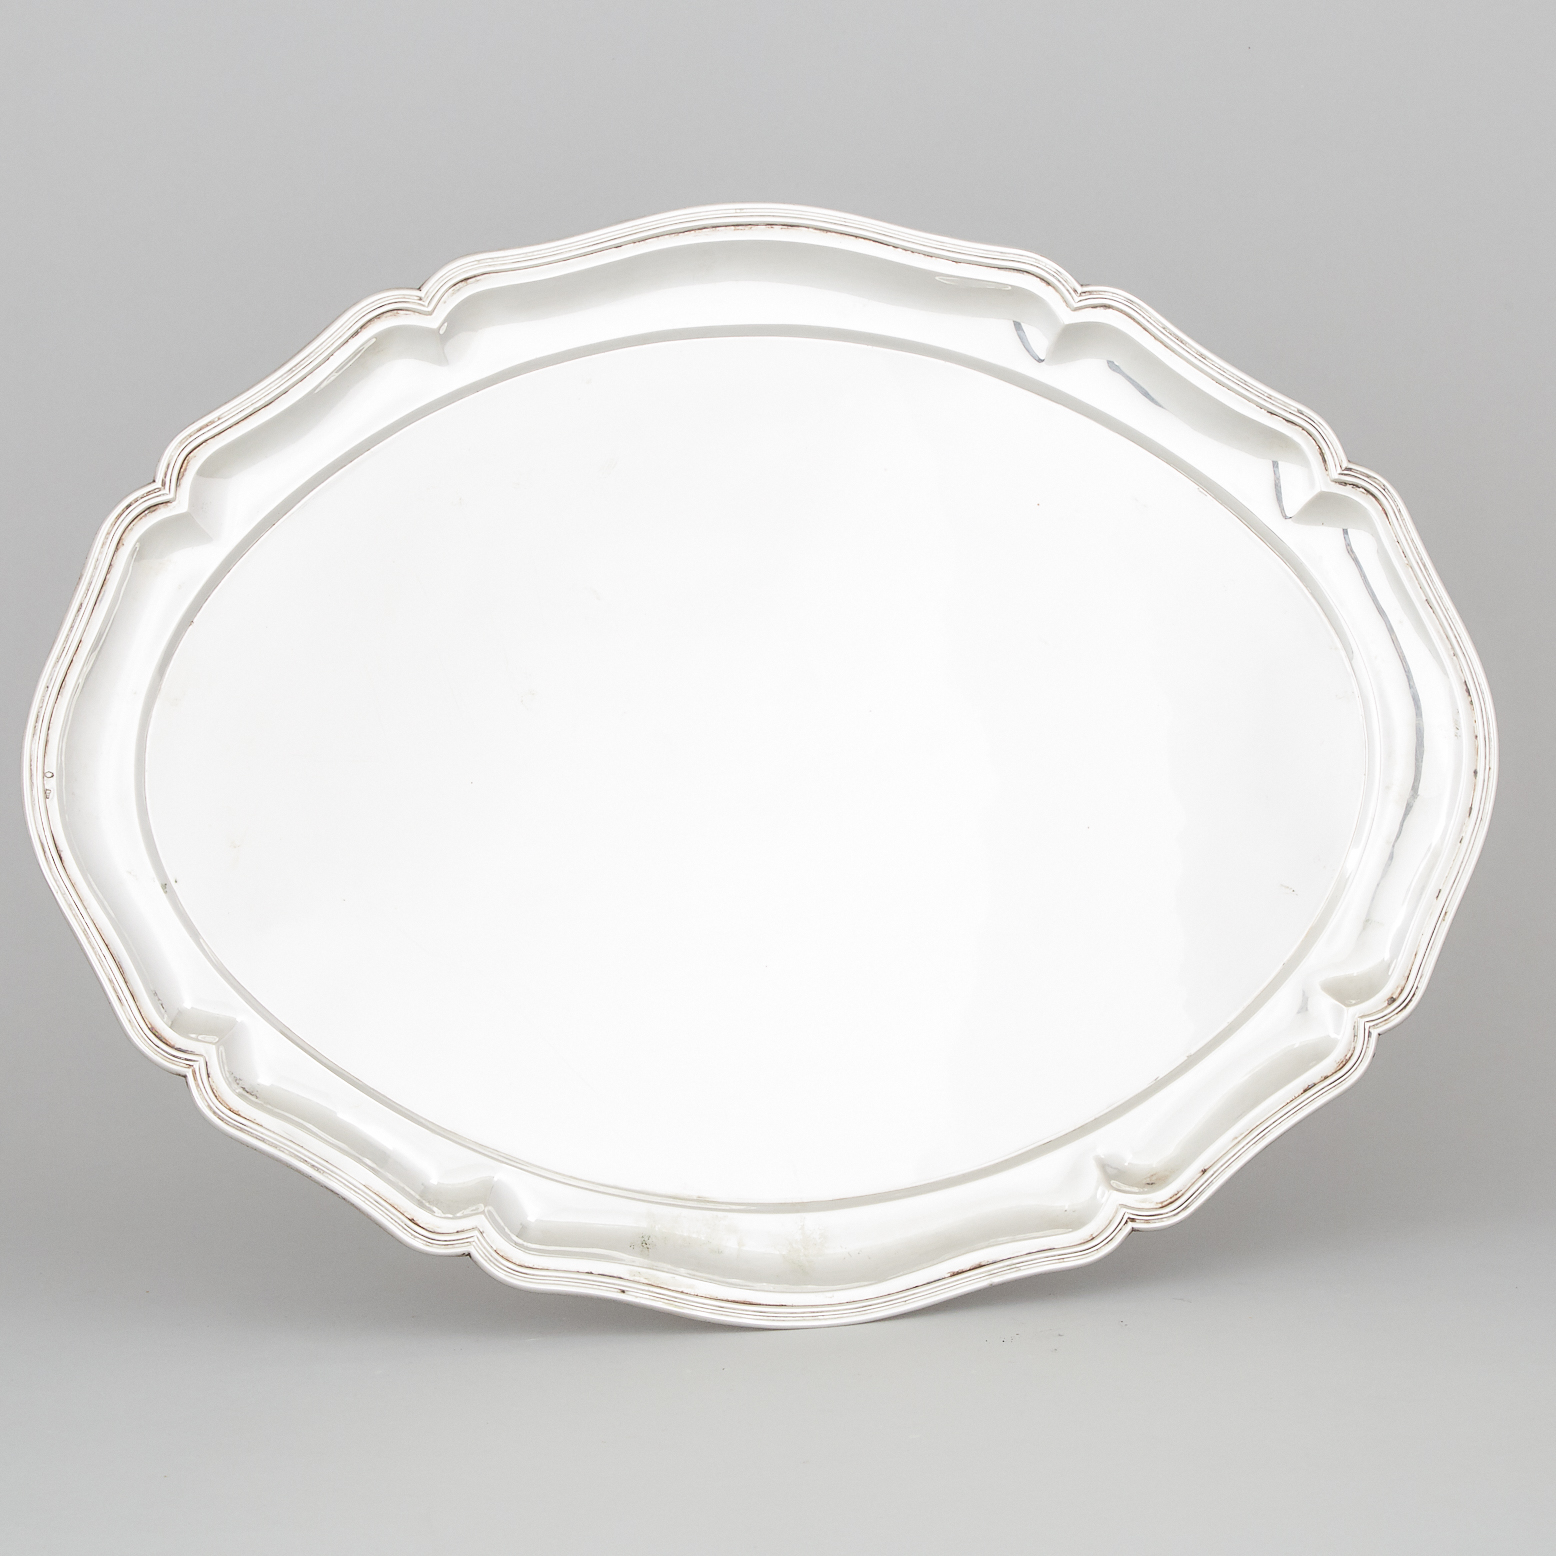 Hungarian Silver Shaped Oval Platter, 20th century